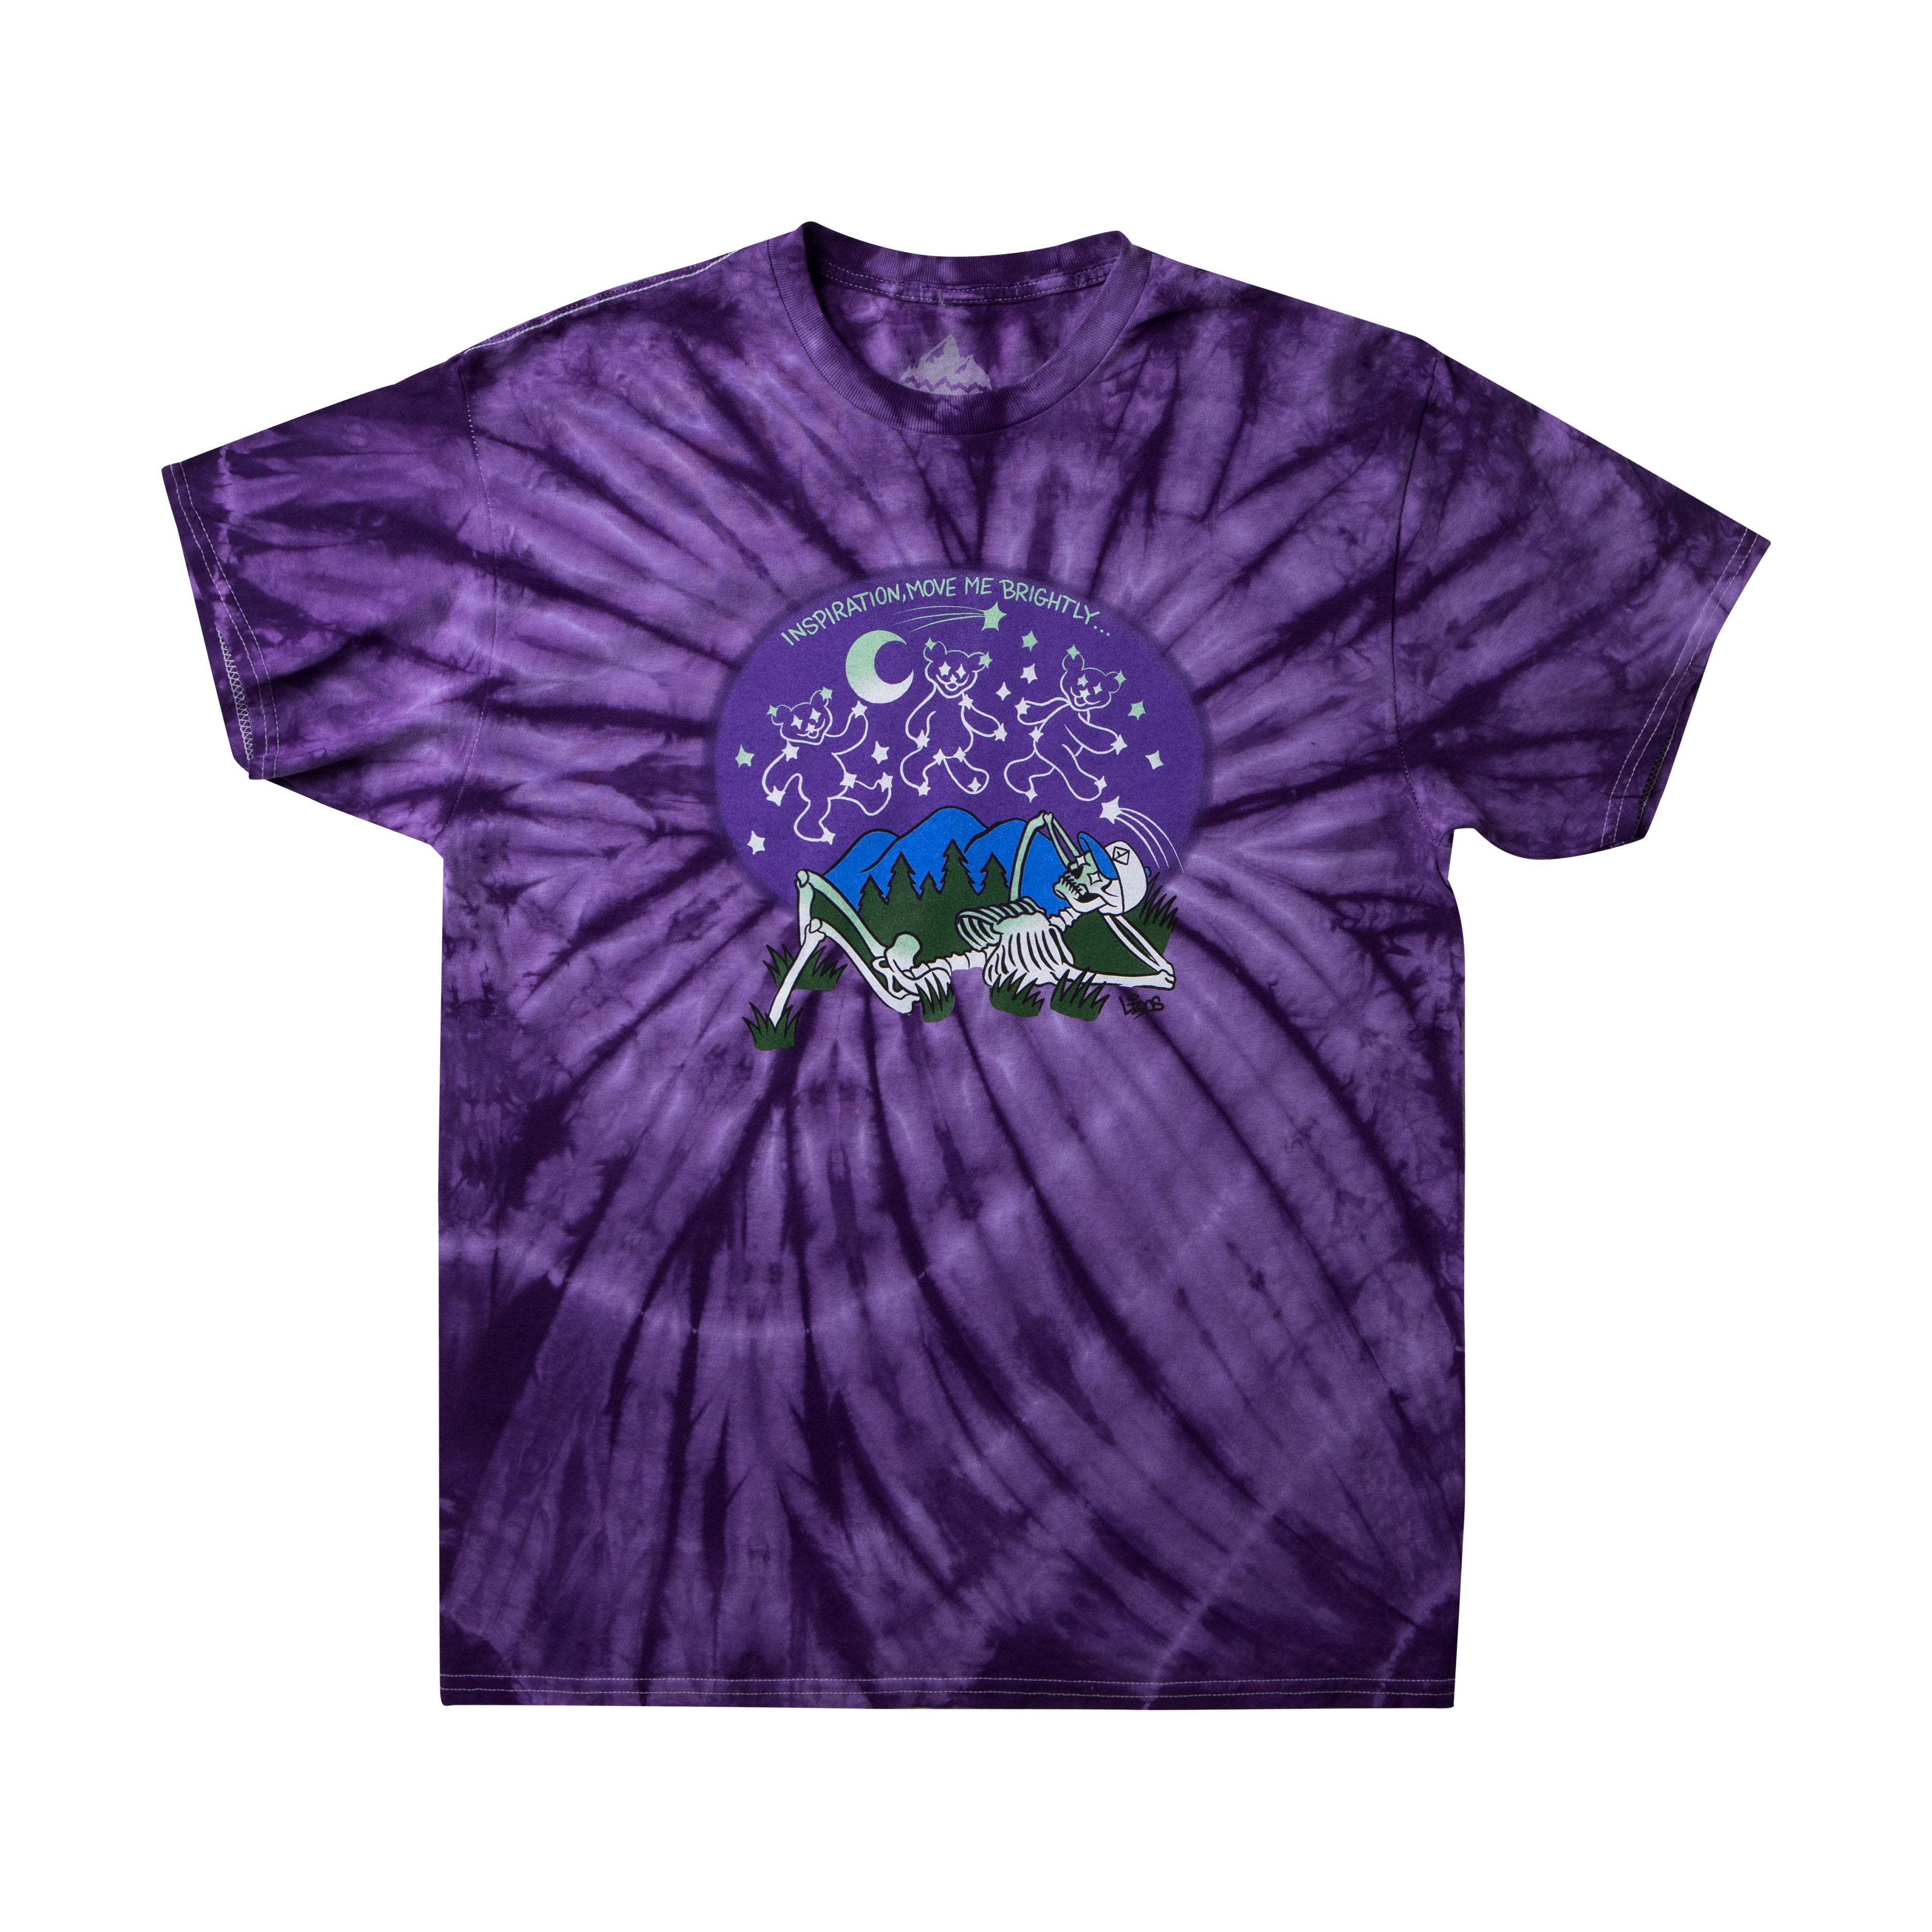 Grateful Dead x TGR “Inspiration, Move Me Brightly” Tee by Fernando Lions